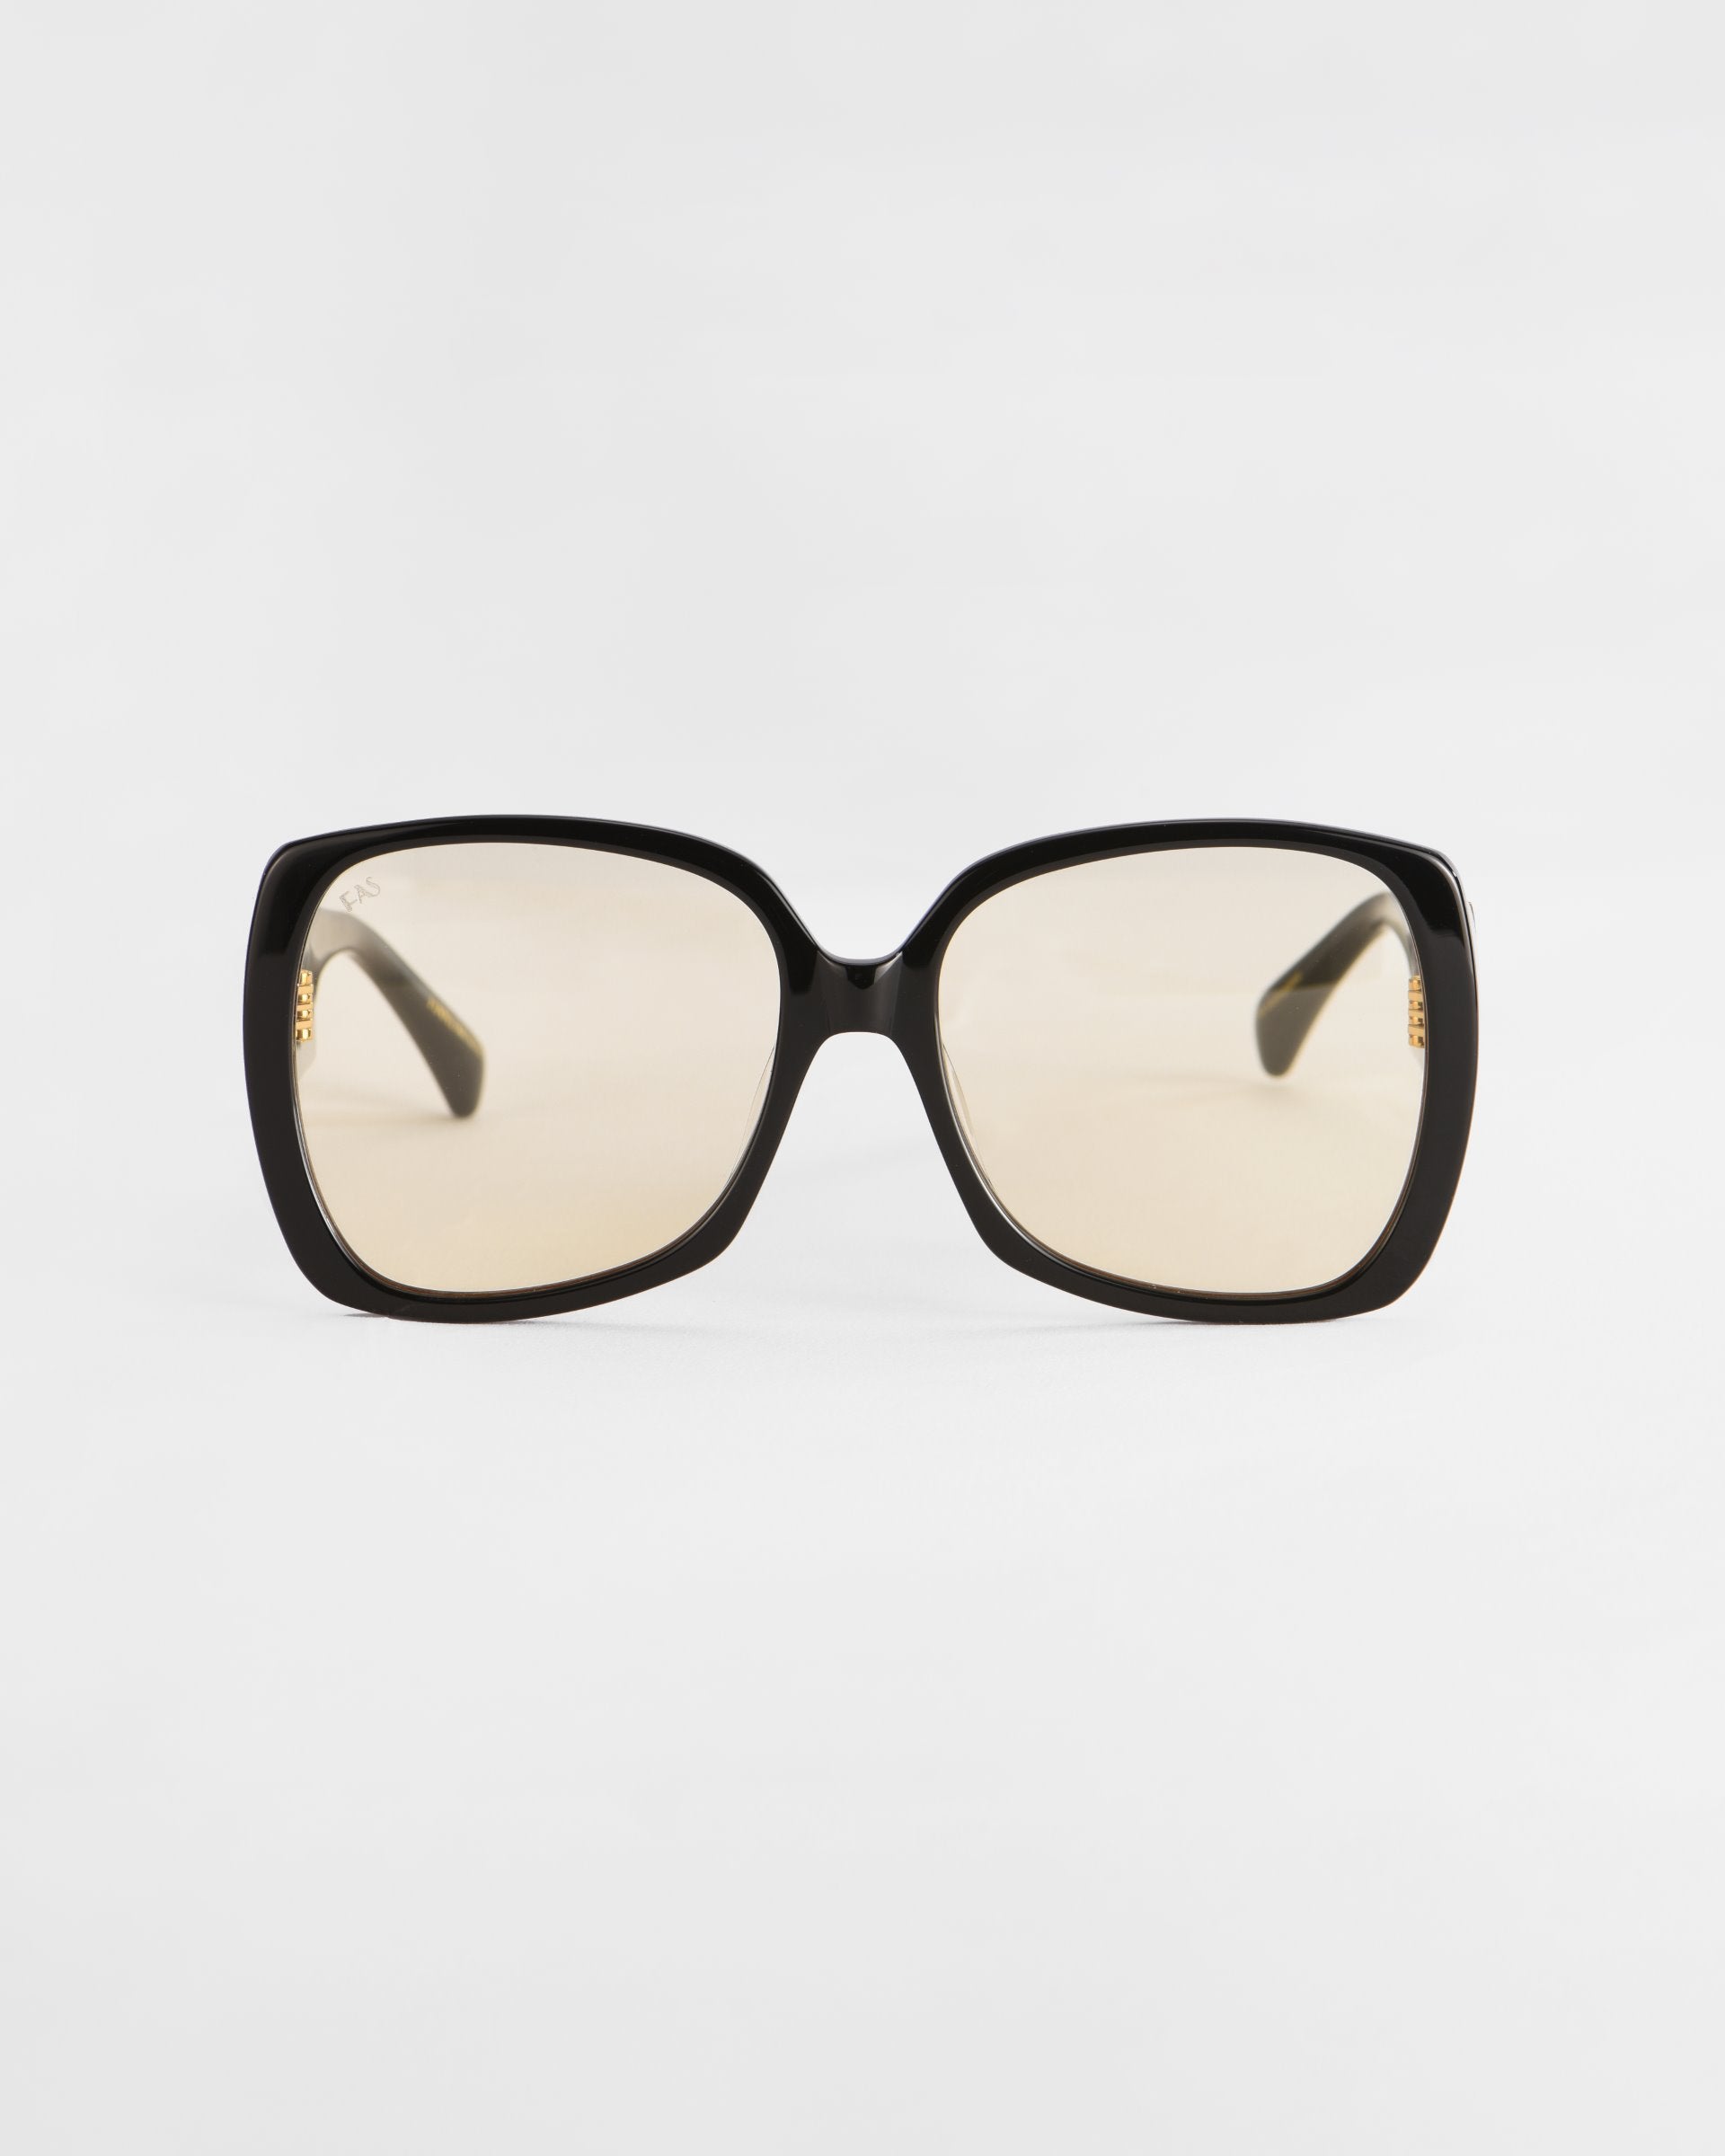 A pair of oversized, square-shaped Odyssey sunglasses with black frames and lightweight nylon lenses from For Art&#39;s Sake® is centered against a white background. The design is simple and sleek, emphasizing the eyewear&#39;s fashion-forward and contemporary style.